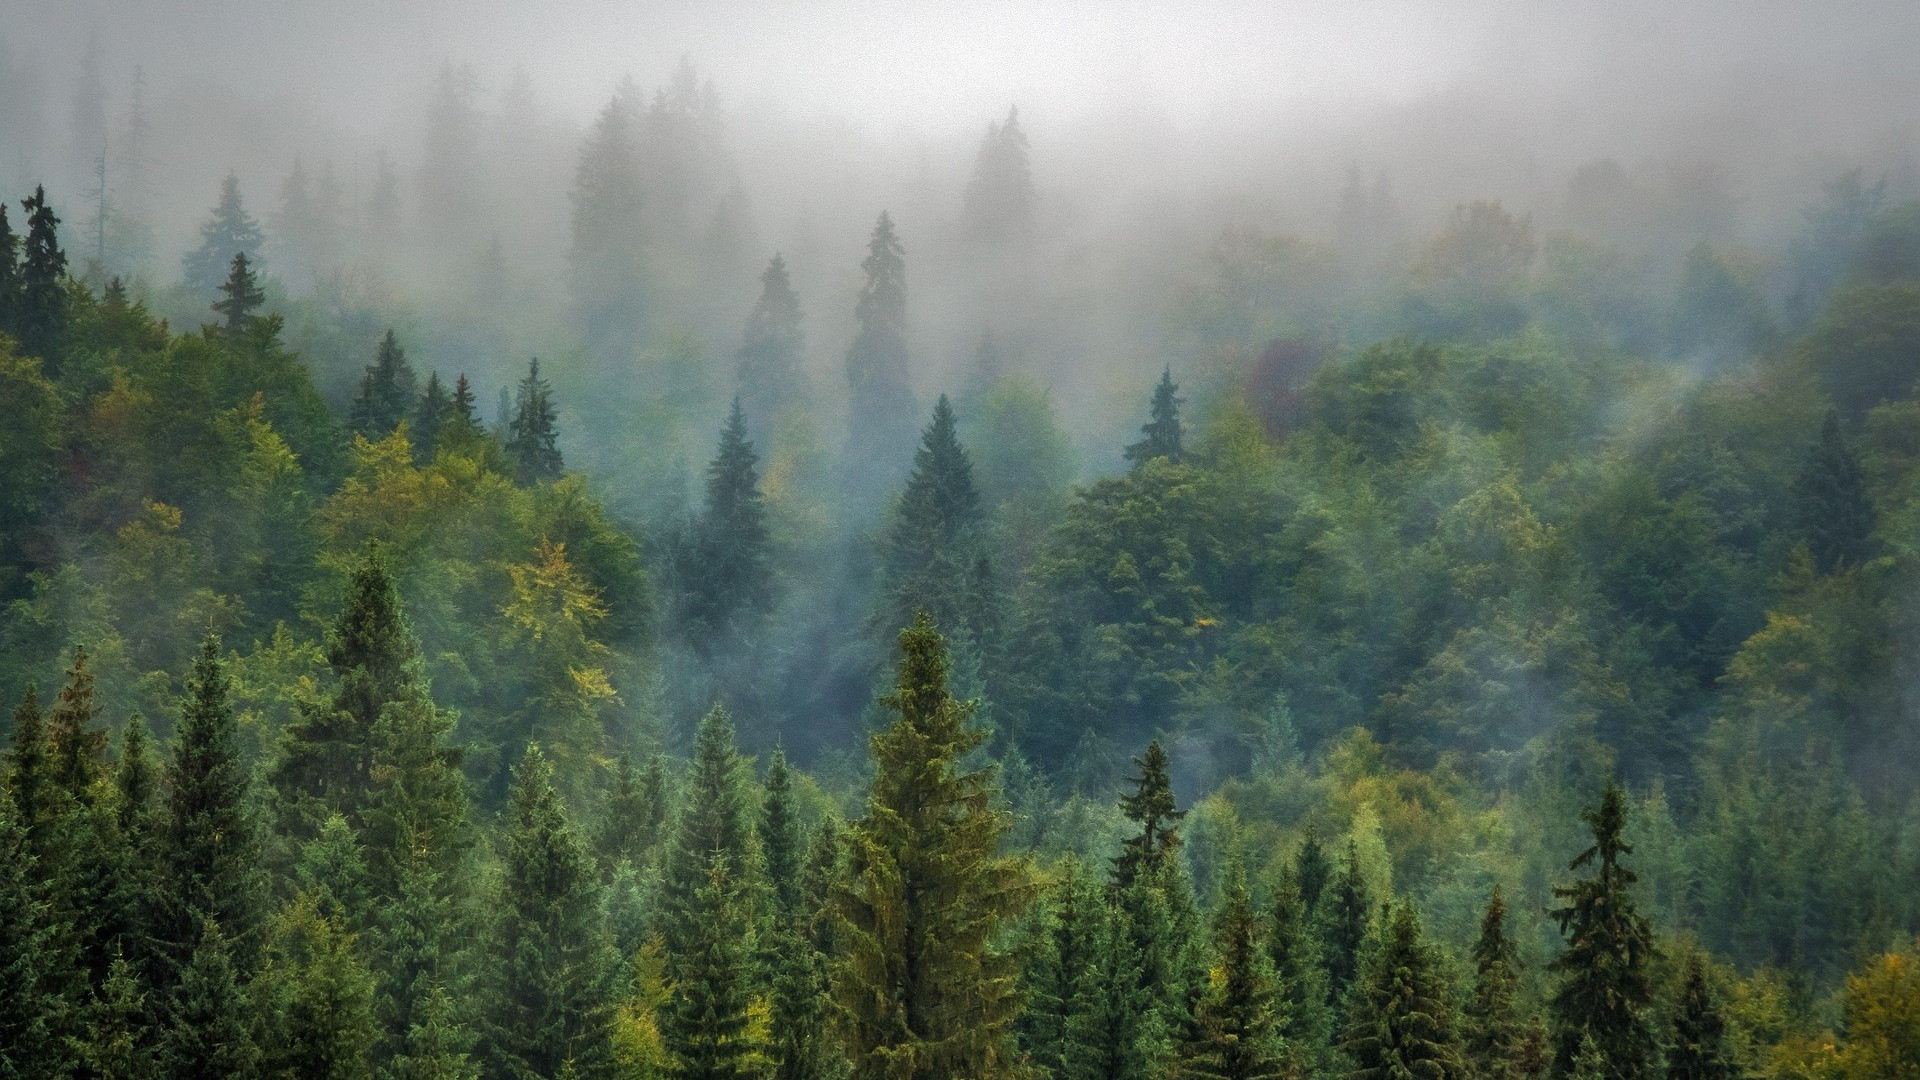 A boreal forest over which low fog is hanging